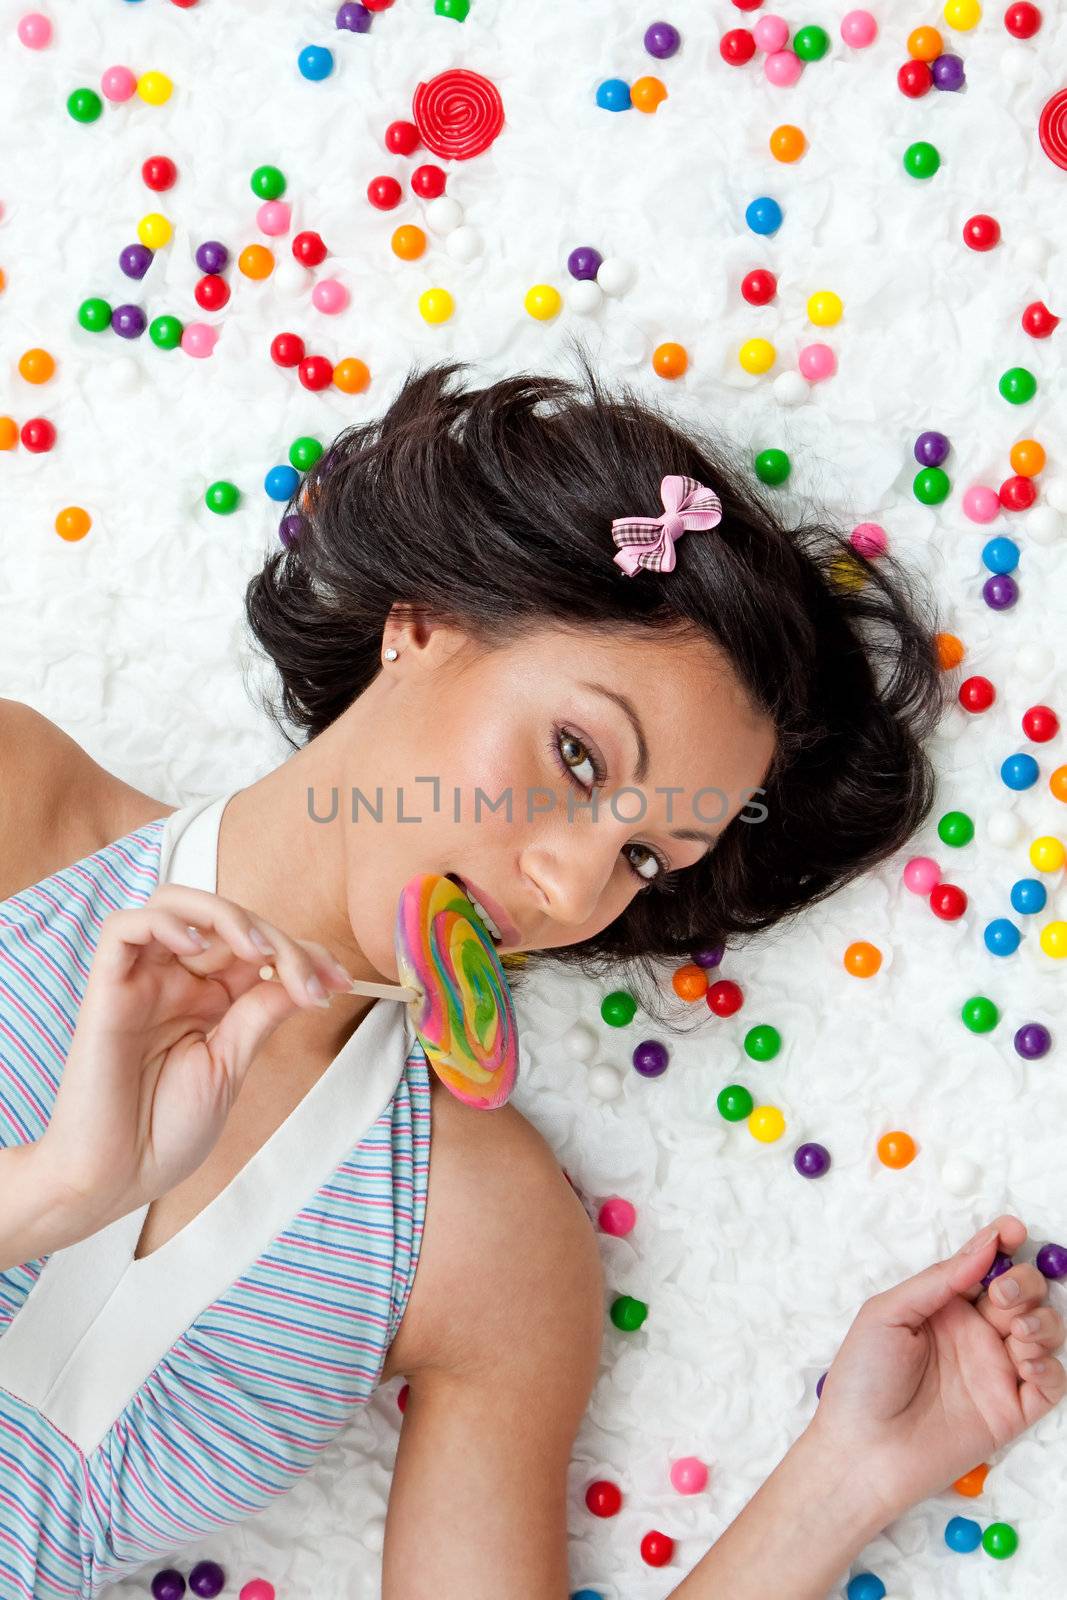 Young Latina woman laying on ruffled cloud like floor between colorful bubblegum balls eating a lollipop